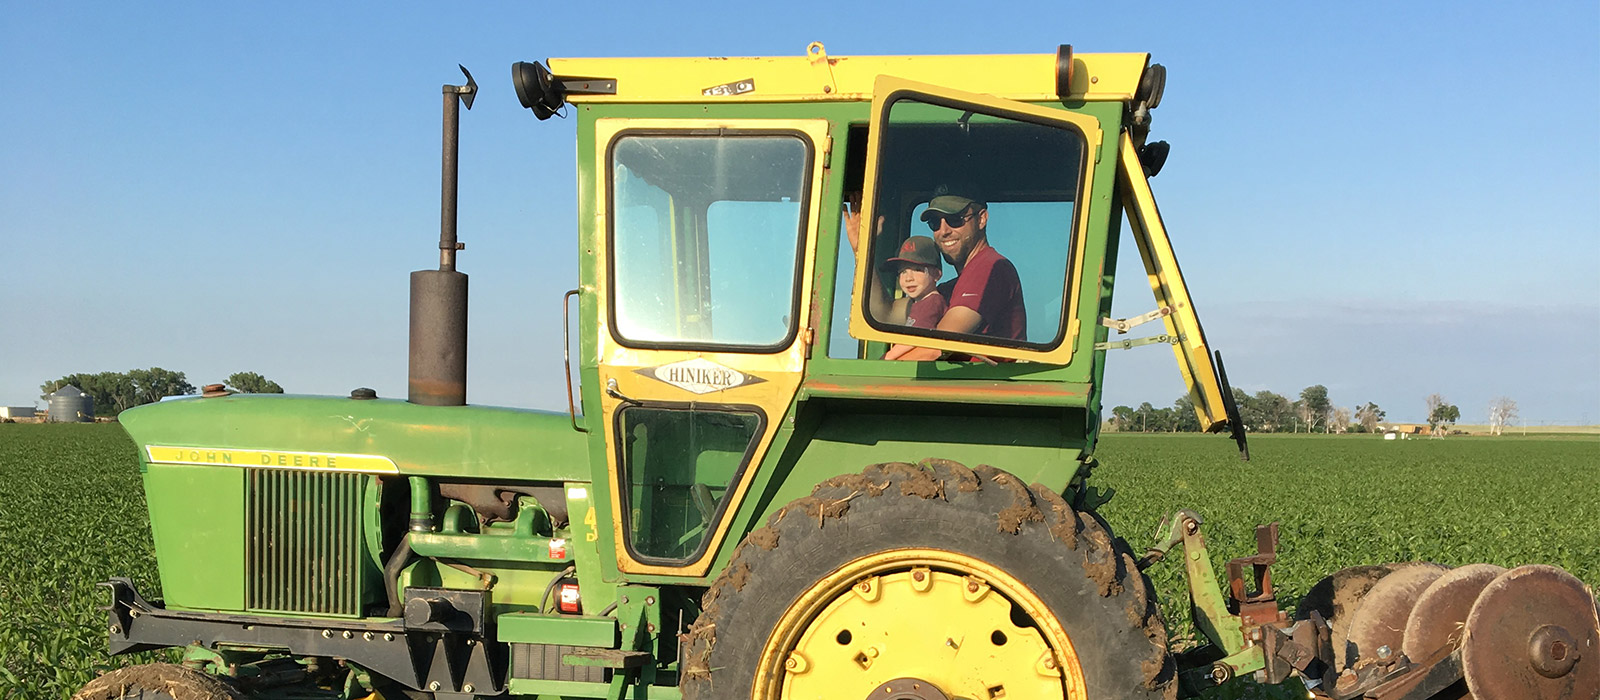 Andy Bartlett and son in a tractor in a field